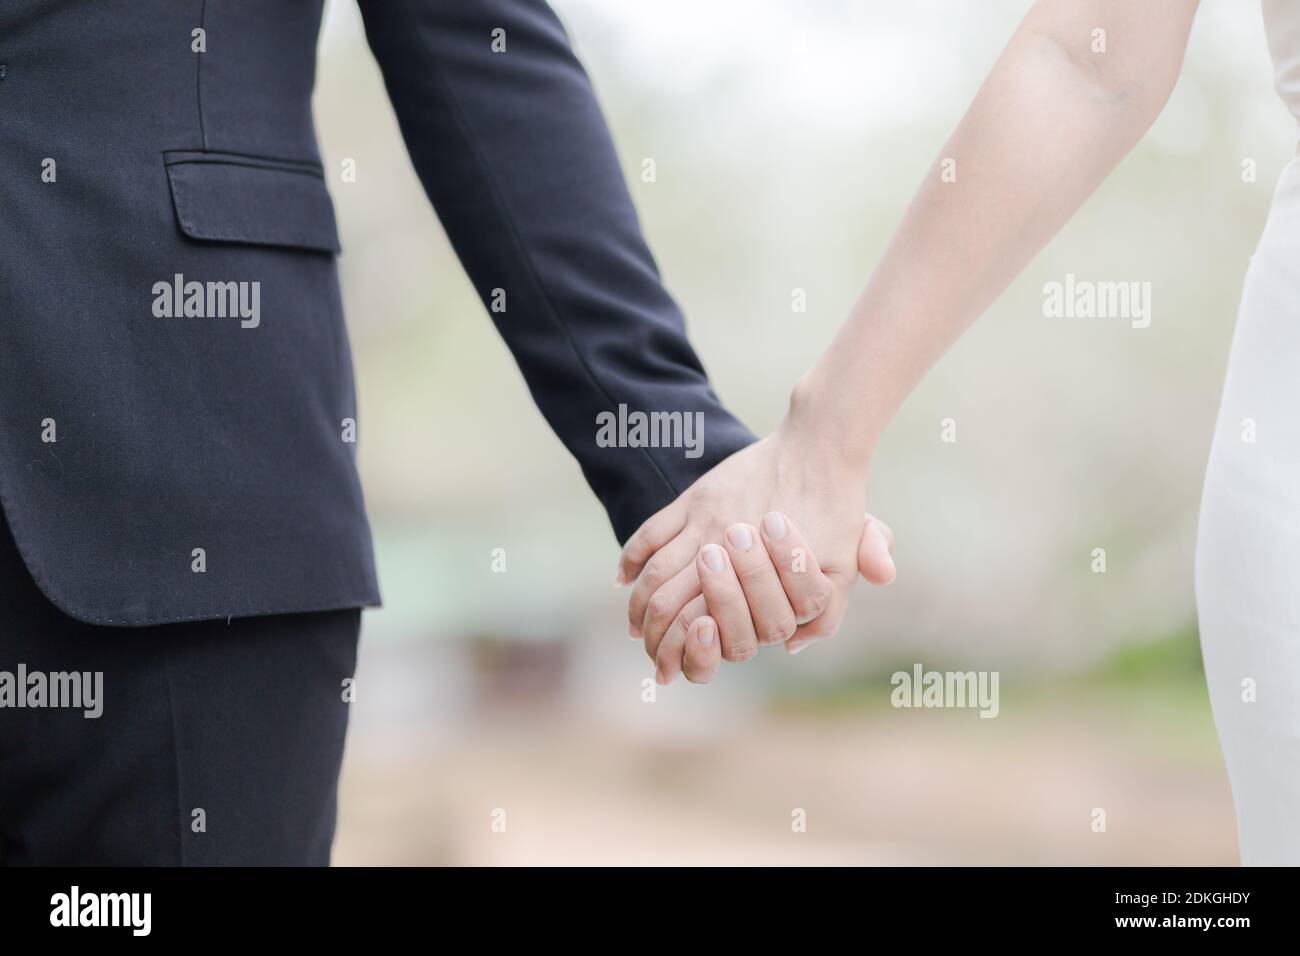 Midsection Of Newlywed Couple Holding Hands While Standing Outdoors Stock Photo